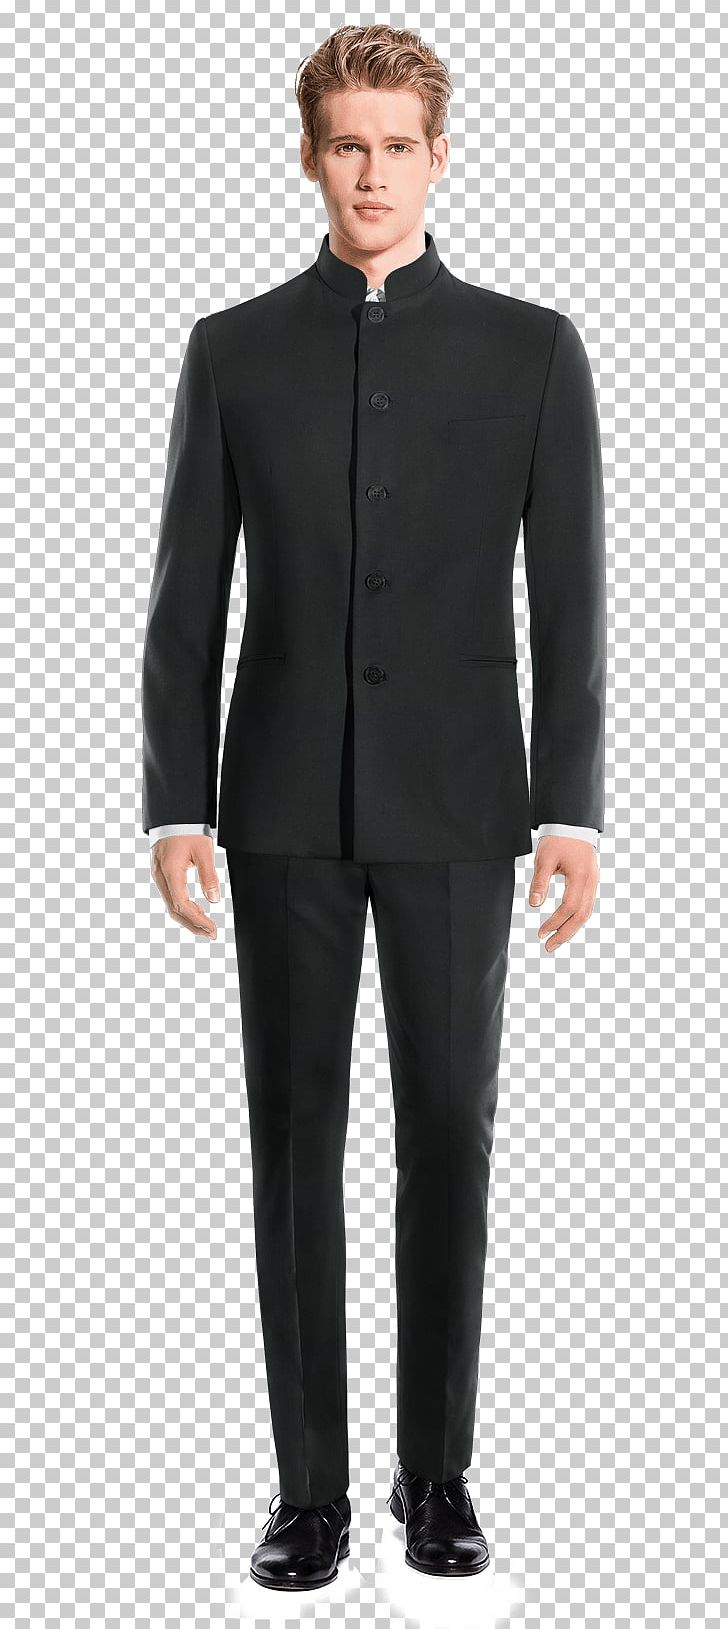 Tweed Pant Suits Tuxedo Pants PNG, Clipart, Bespoke Tailoring, Black, Blazer, Businessperson, Chino Cloth Free PNG Download